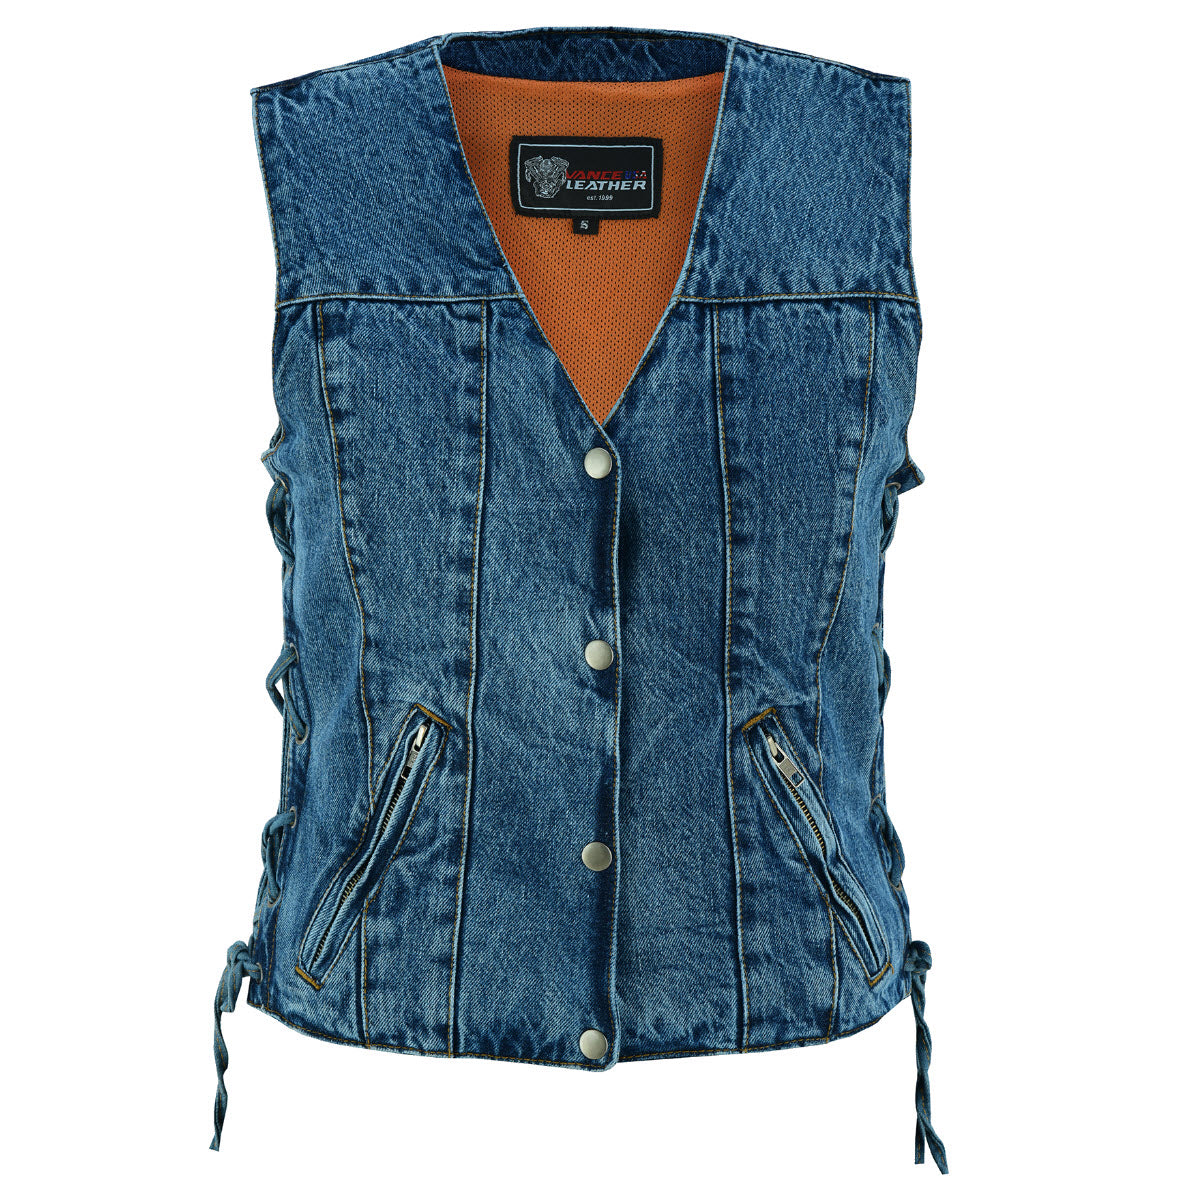 A Vance Leather Women's Blue Denim V-Neck Vest w/Snap Opening & Side Laces with adjustable and pockets.